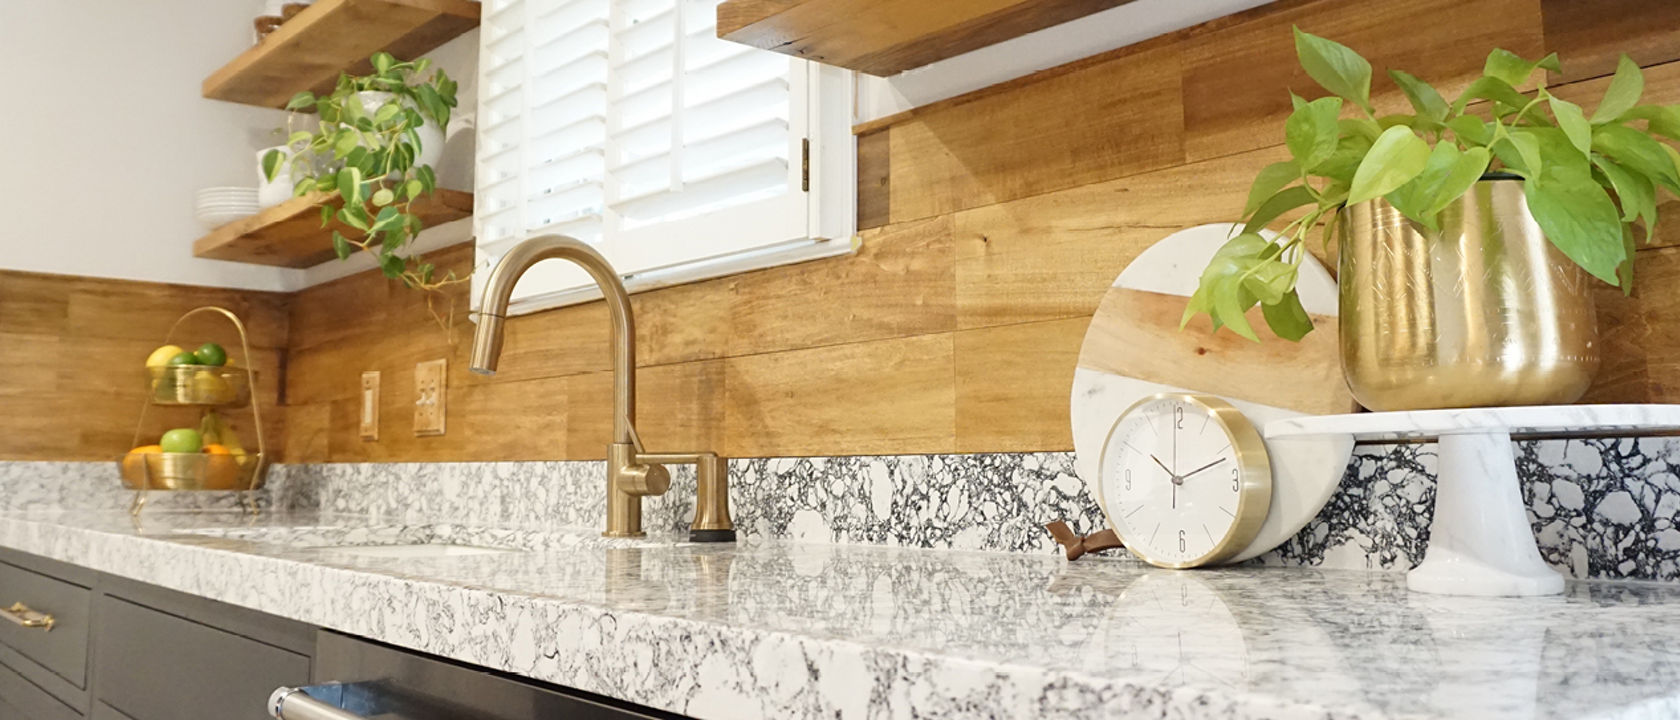 A detailed view of a kitchen counter with a Cambria Rose Bay quartz countertop.